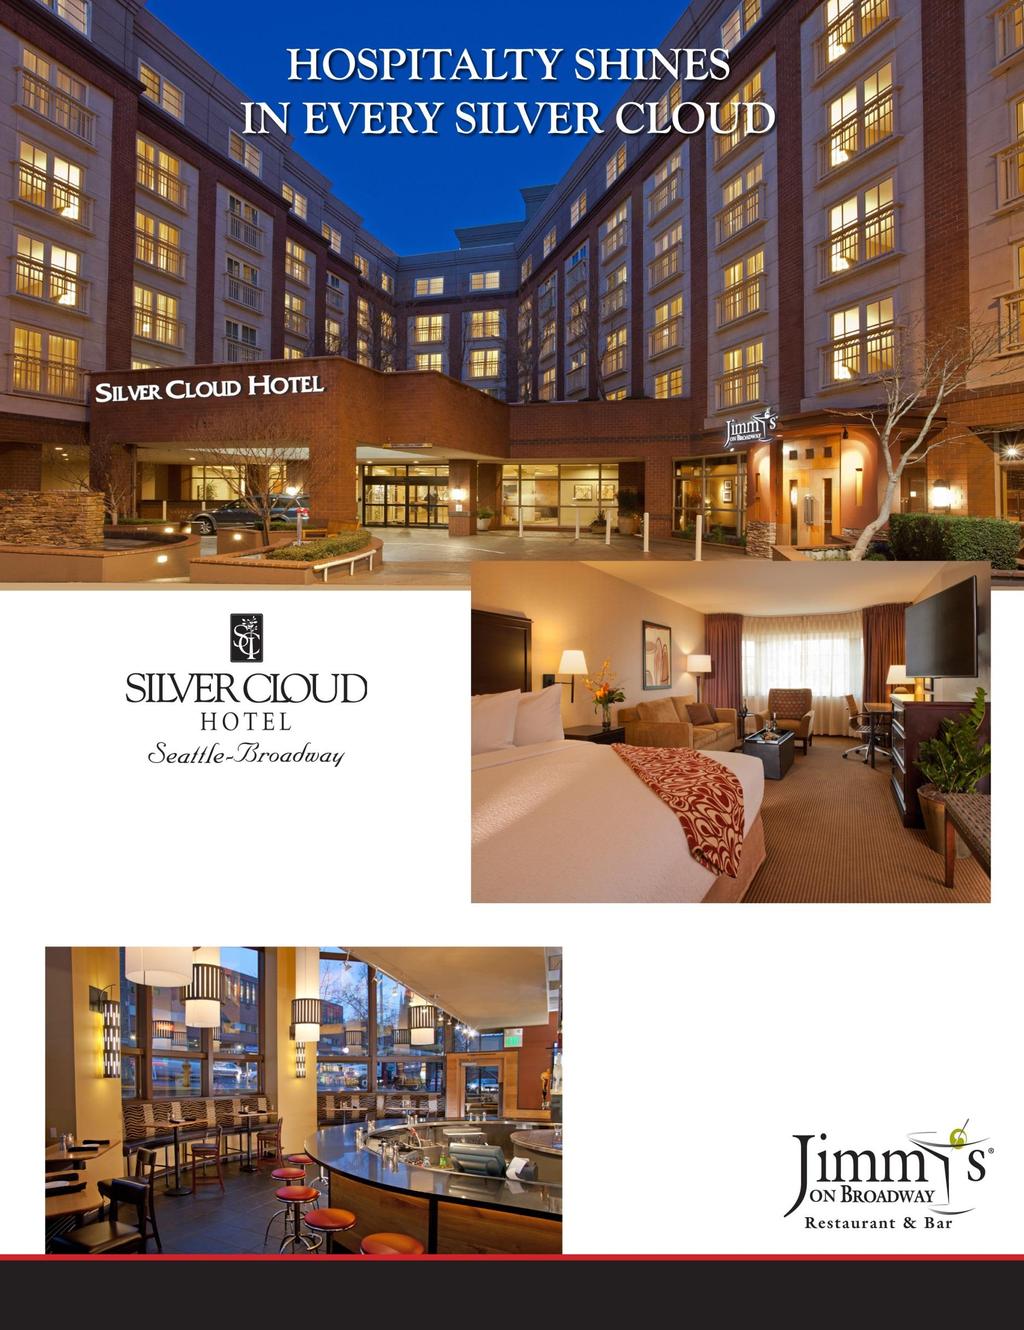 Located in the trendy Capitol Hill neighborhood, the Silver Cloud Hotel Seattle Broadway is directly across the street from Seattle University and Swedish Medical Center.